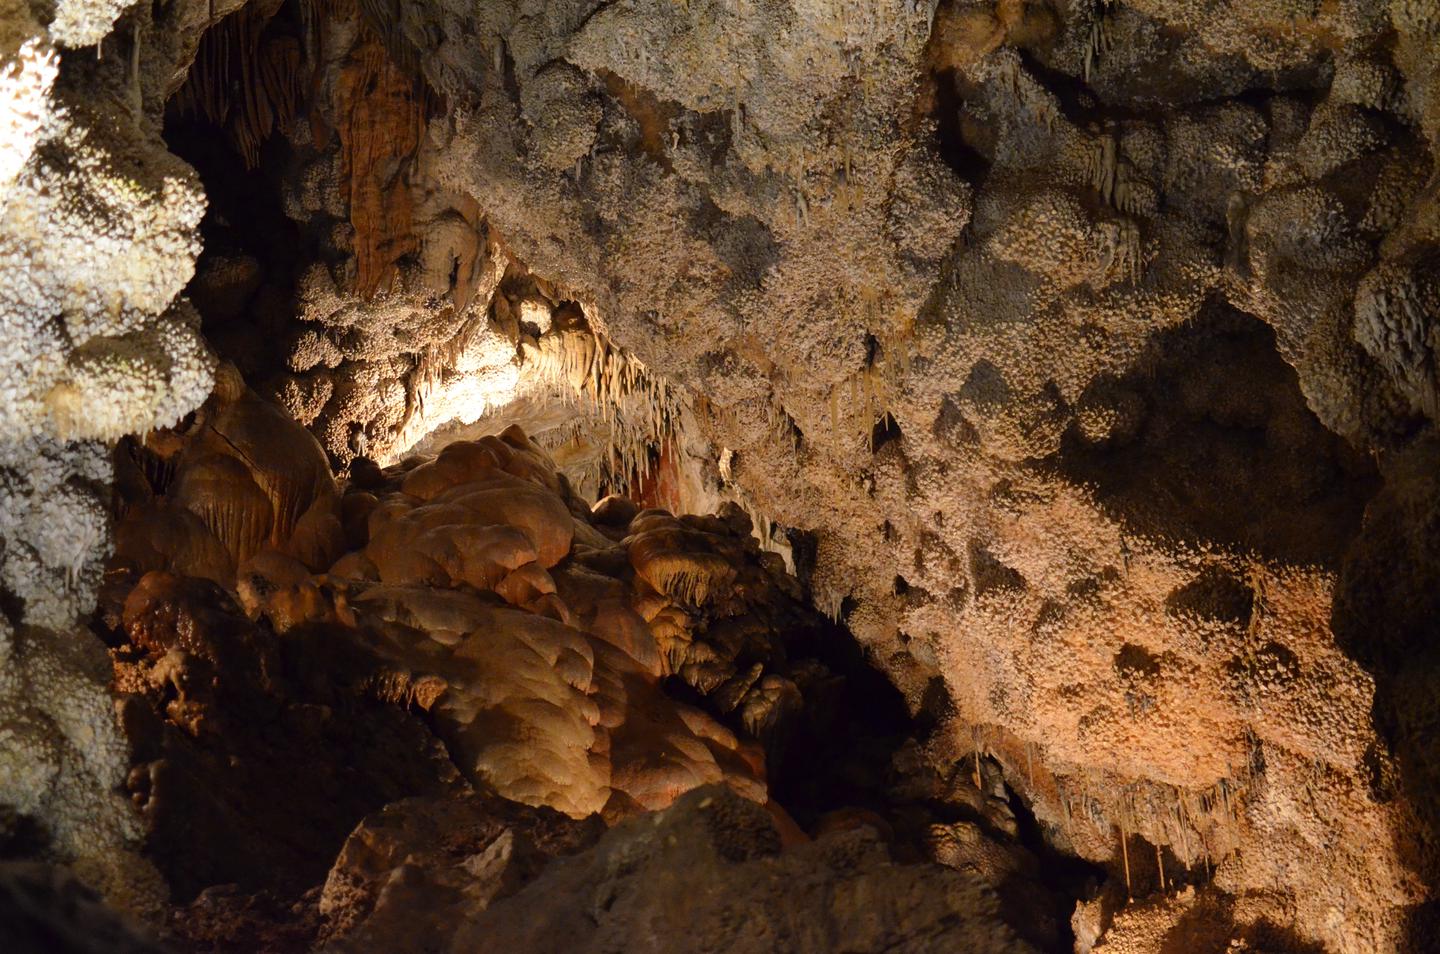 Cave formations seen along the cave passage.Cave formations such as stalactites, stalagmites, flowstone, and draperies can be seen on the Scenic Tour.